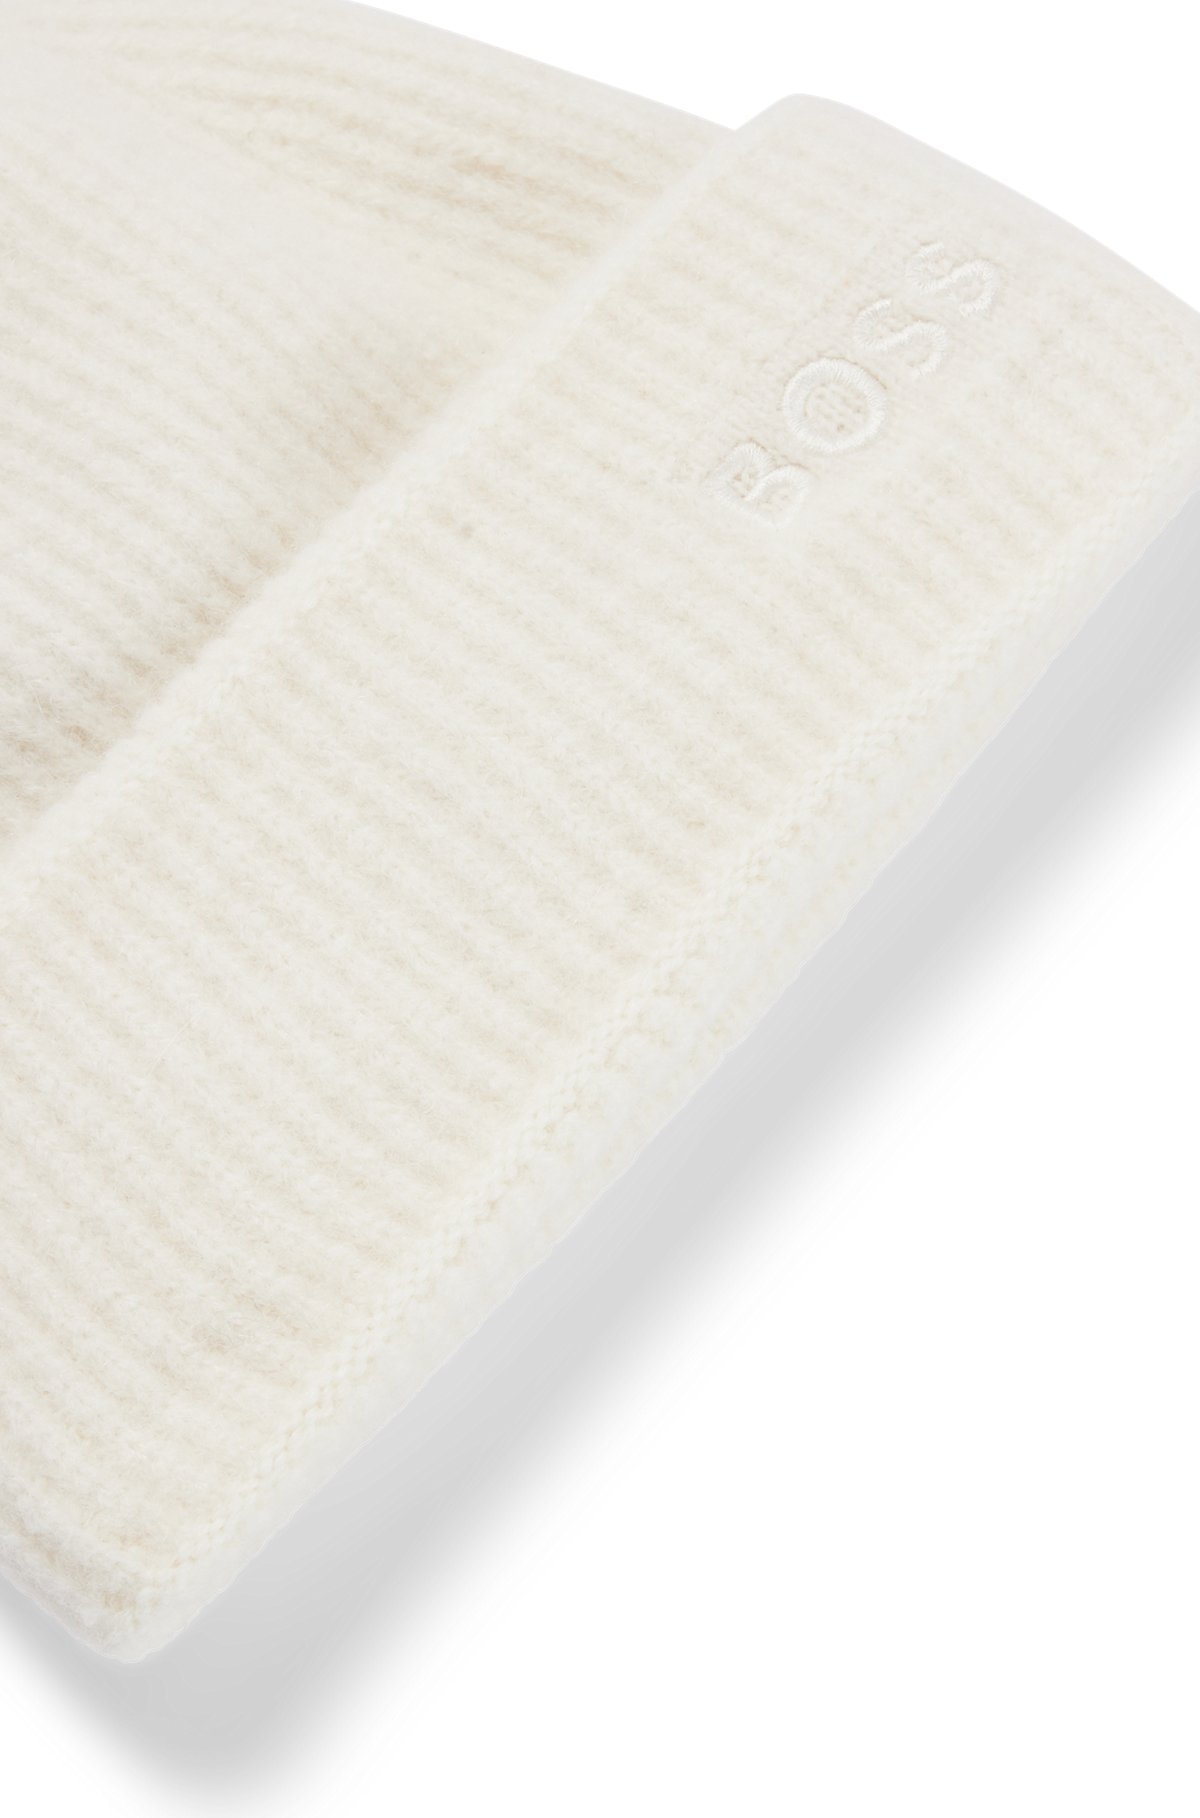 Ribbed beanie hat with embroidered logo, White